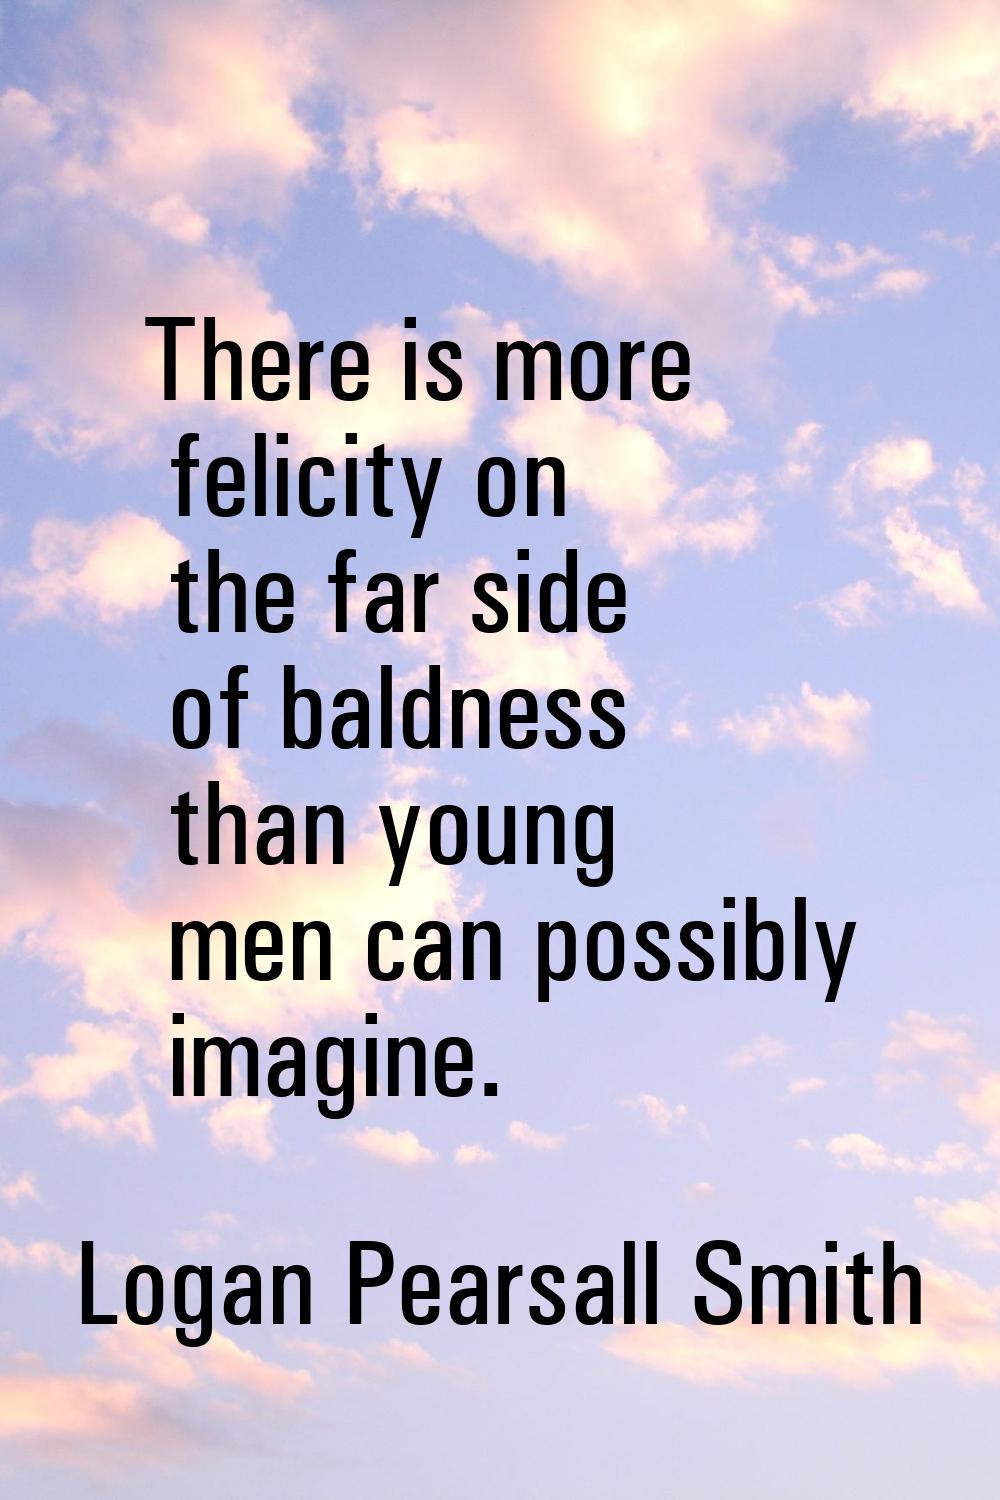 There is more felicity on the far side of baldness than young men can possibly imagine.